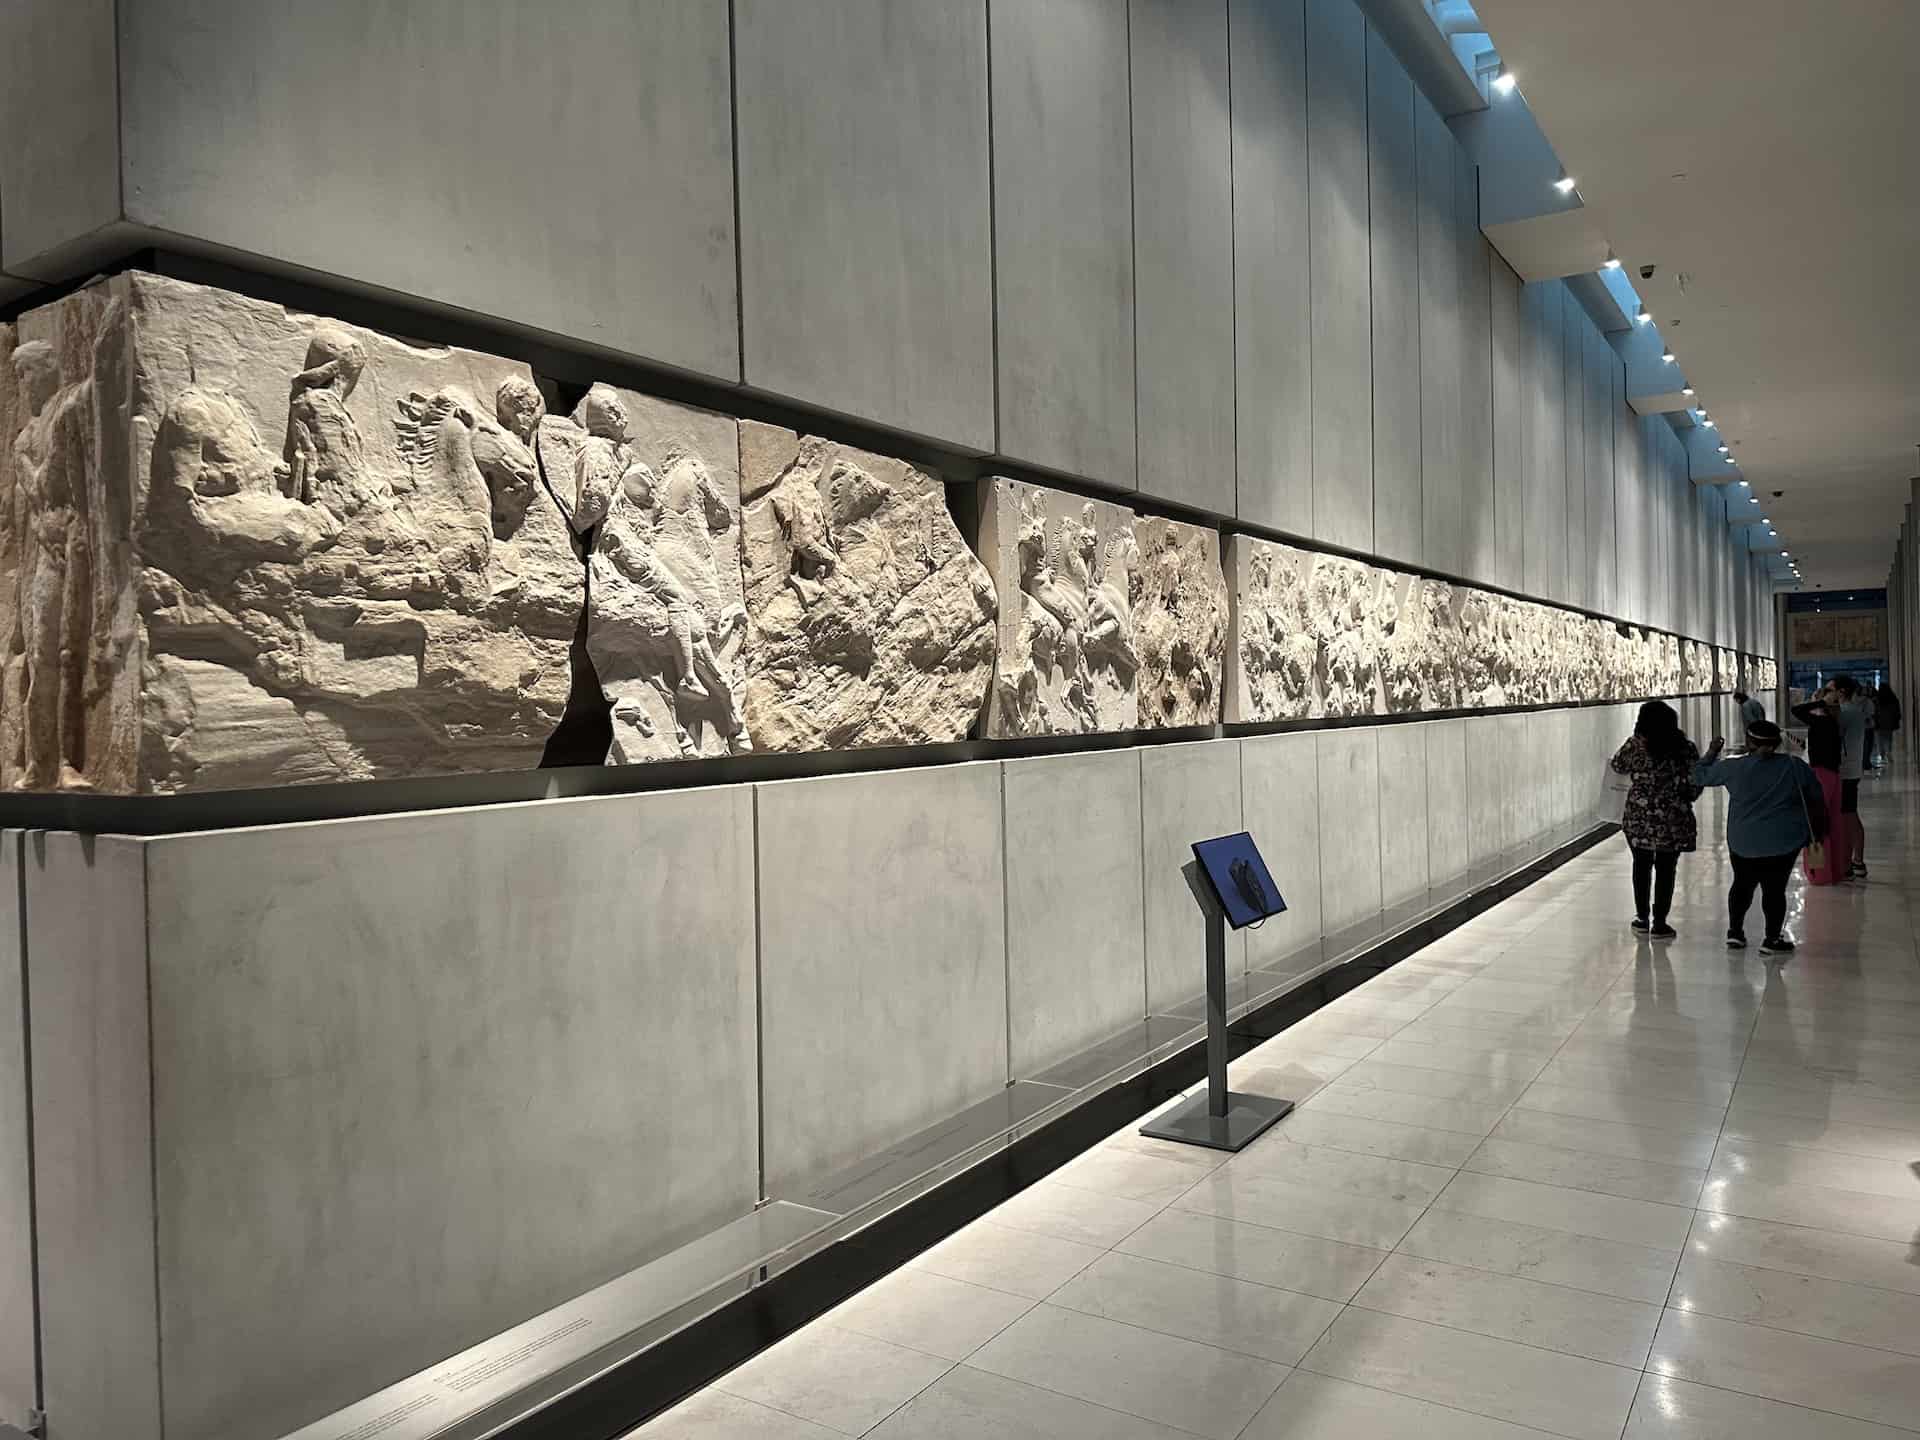 South frieze of the Parthenon at the Acropolis Museum in Athens, Greece